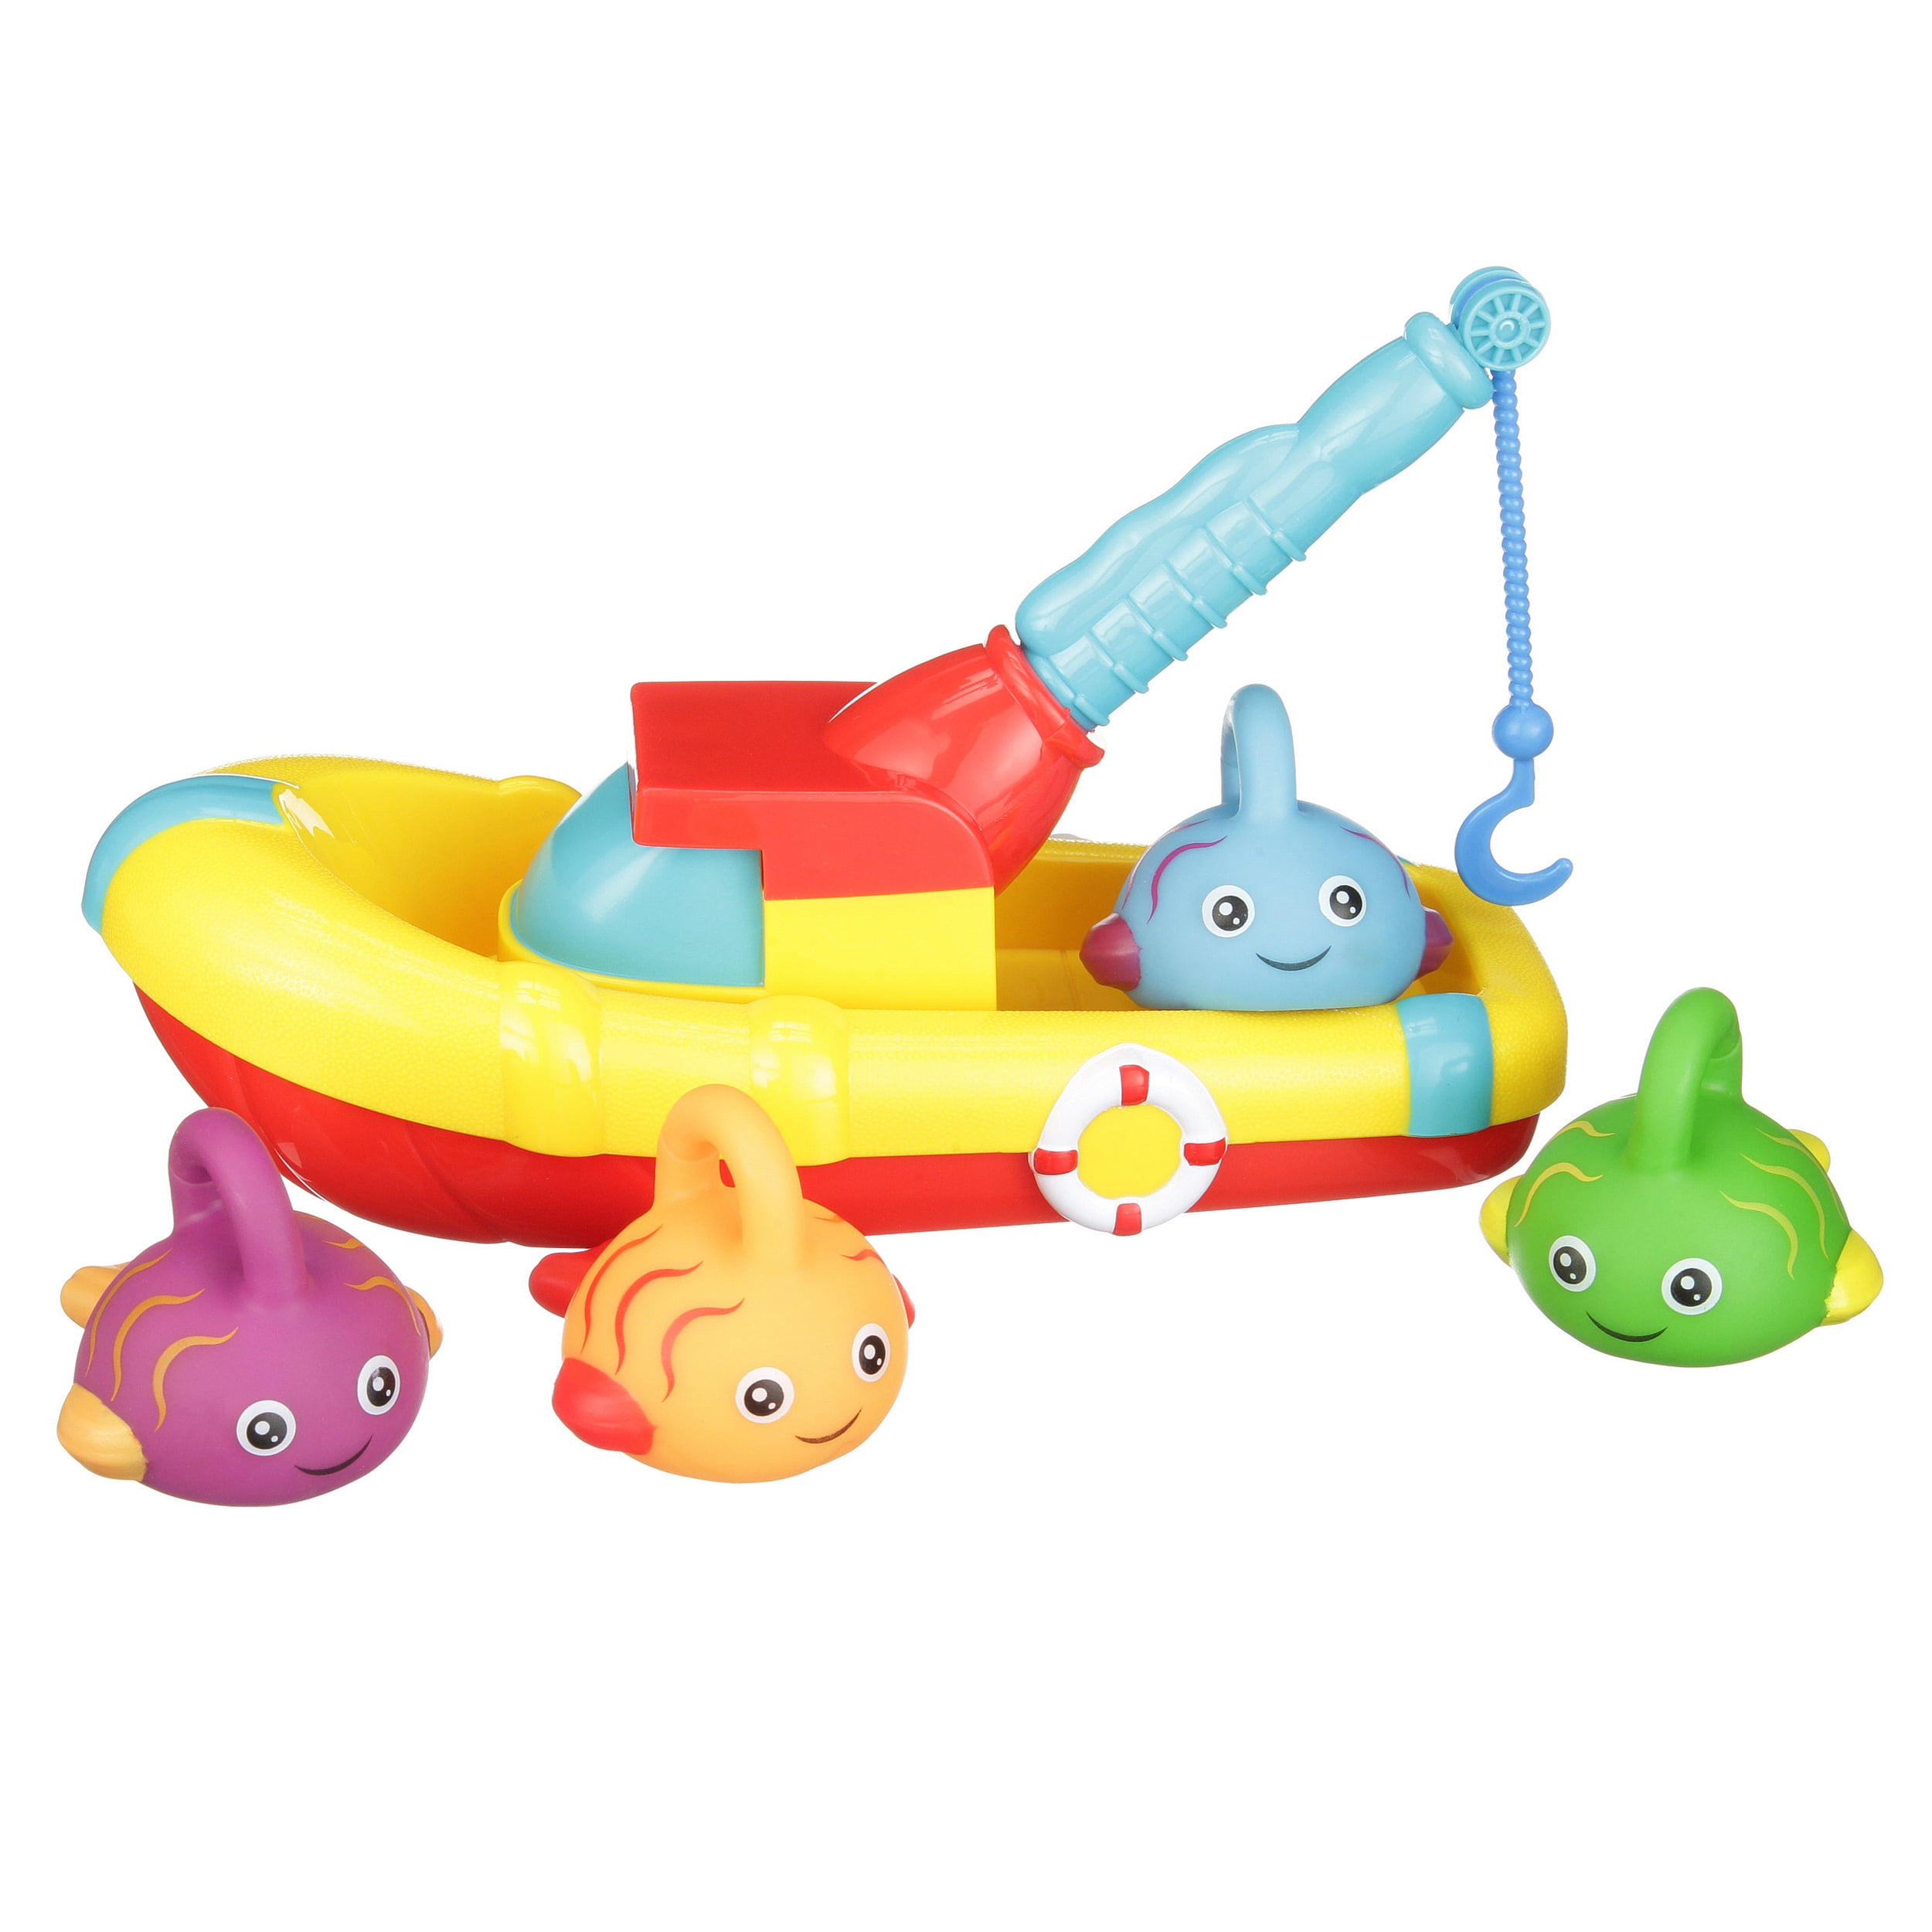 Sassy Baby Water Inspire Imagination Lovely Animal Boats Bath Play Toy 